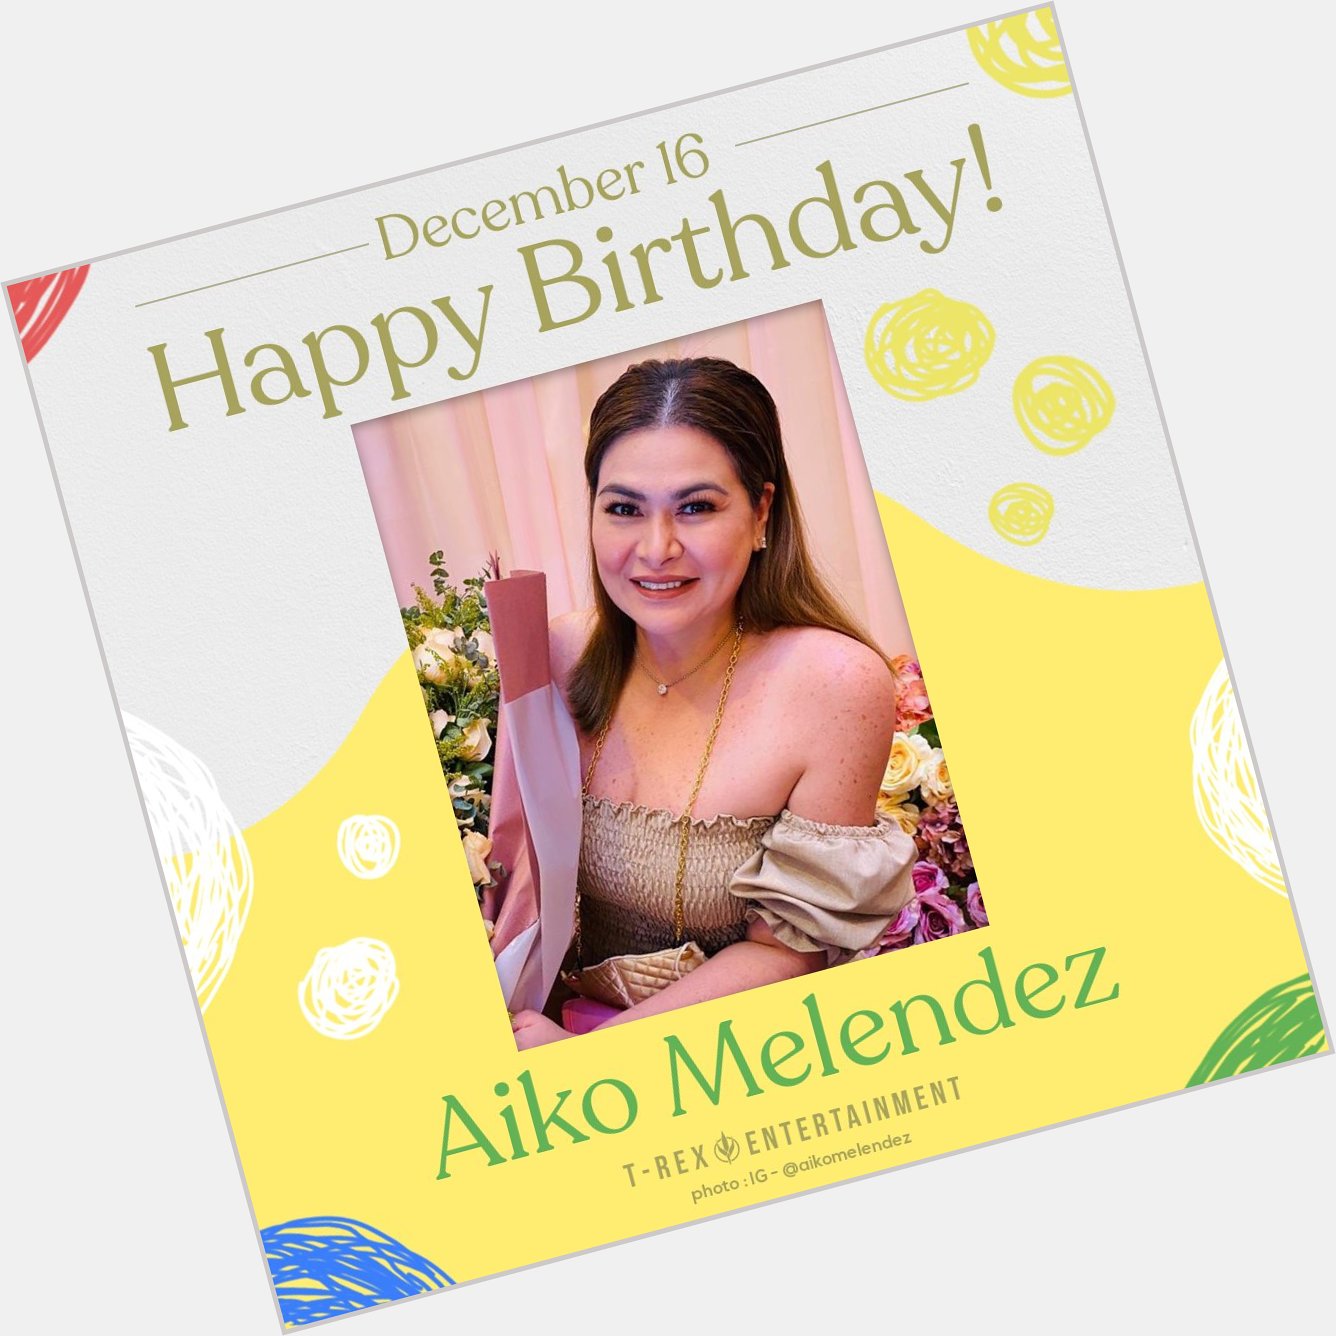 Happy birthday to you, Ms. Aiko Melendez! Sending you smiles for every moment of this special day. 